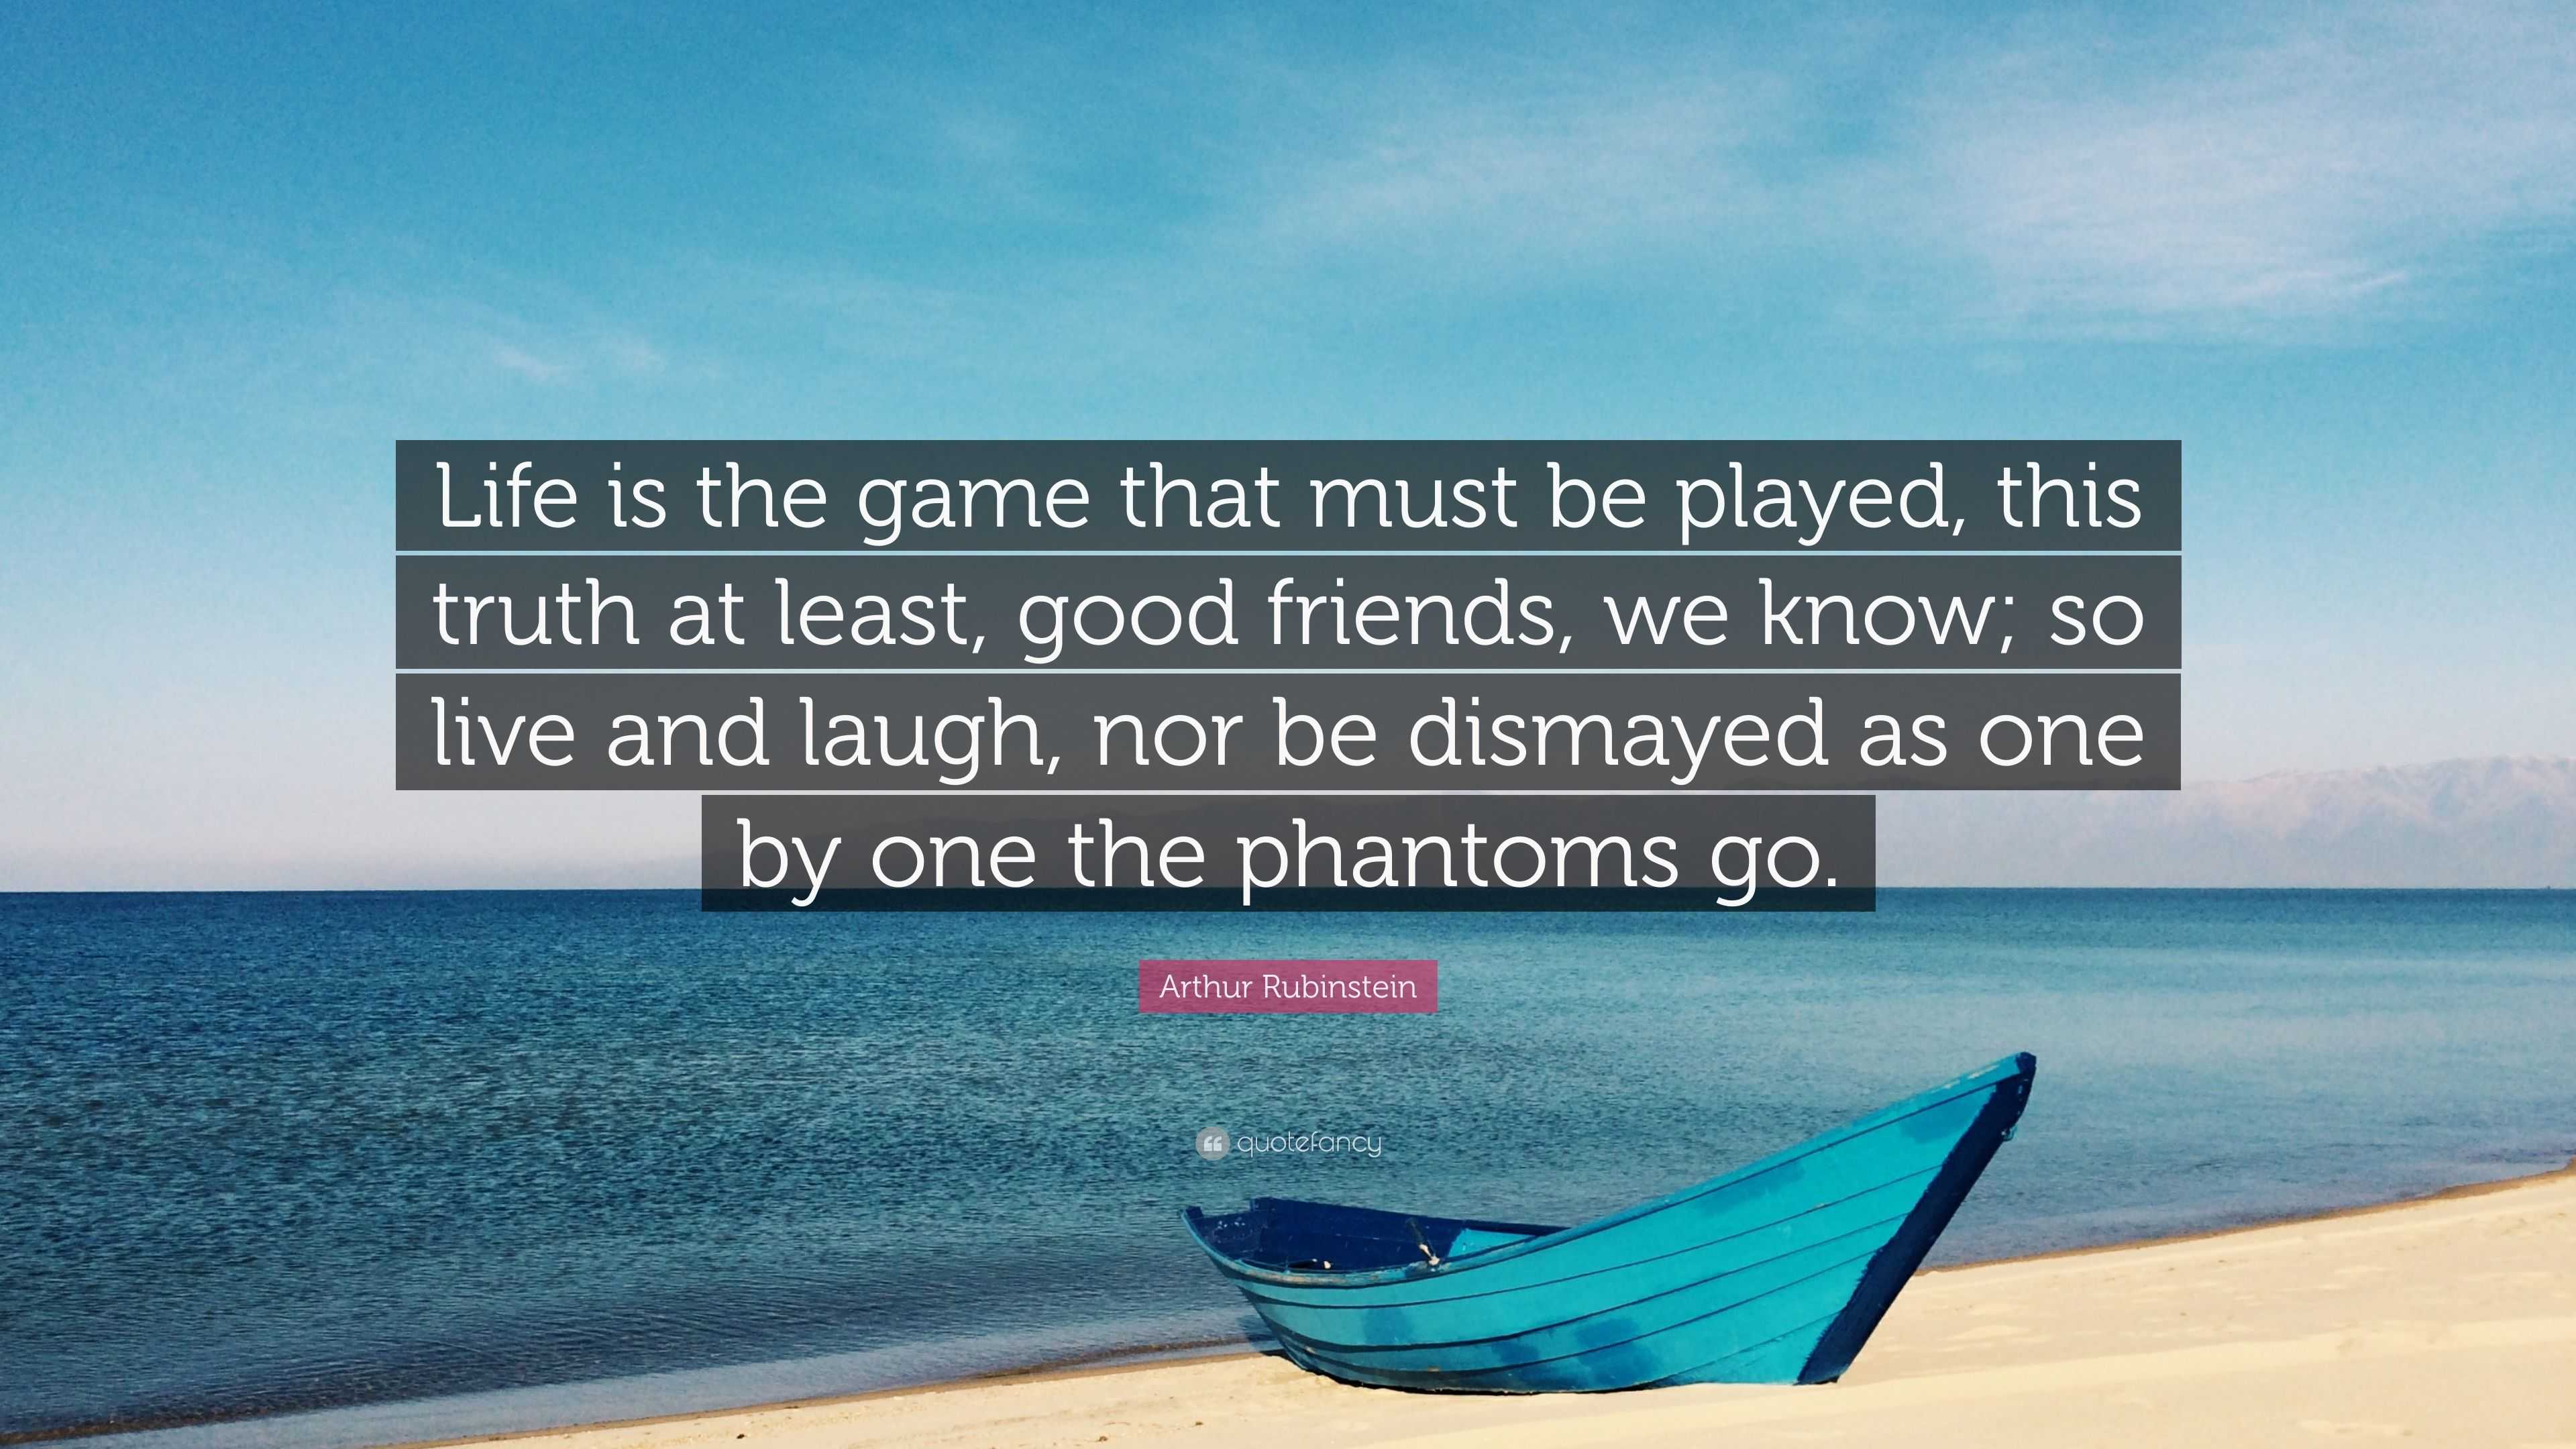 Quotes about life - Life is the game that must be played, this truth..